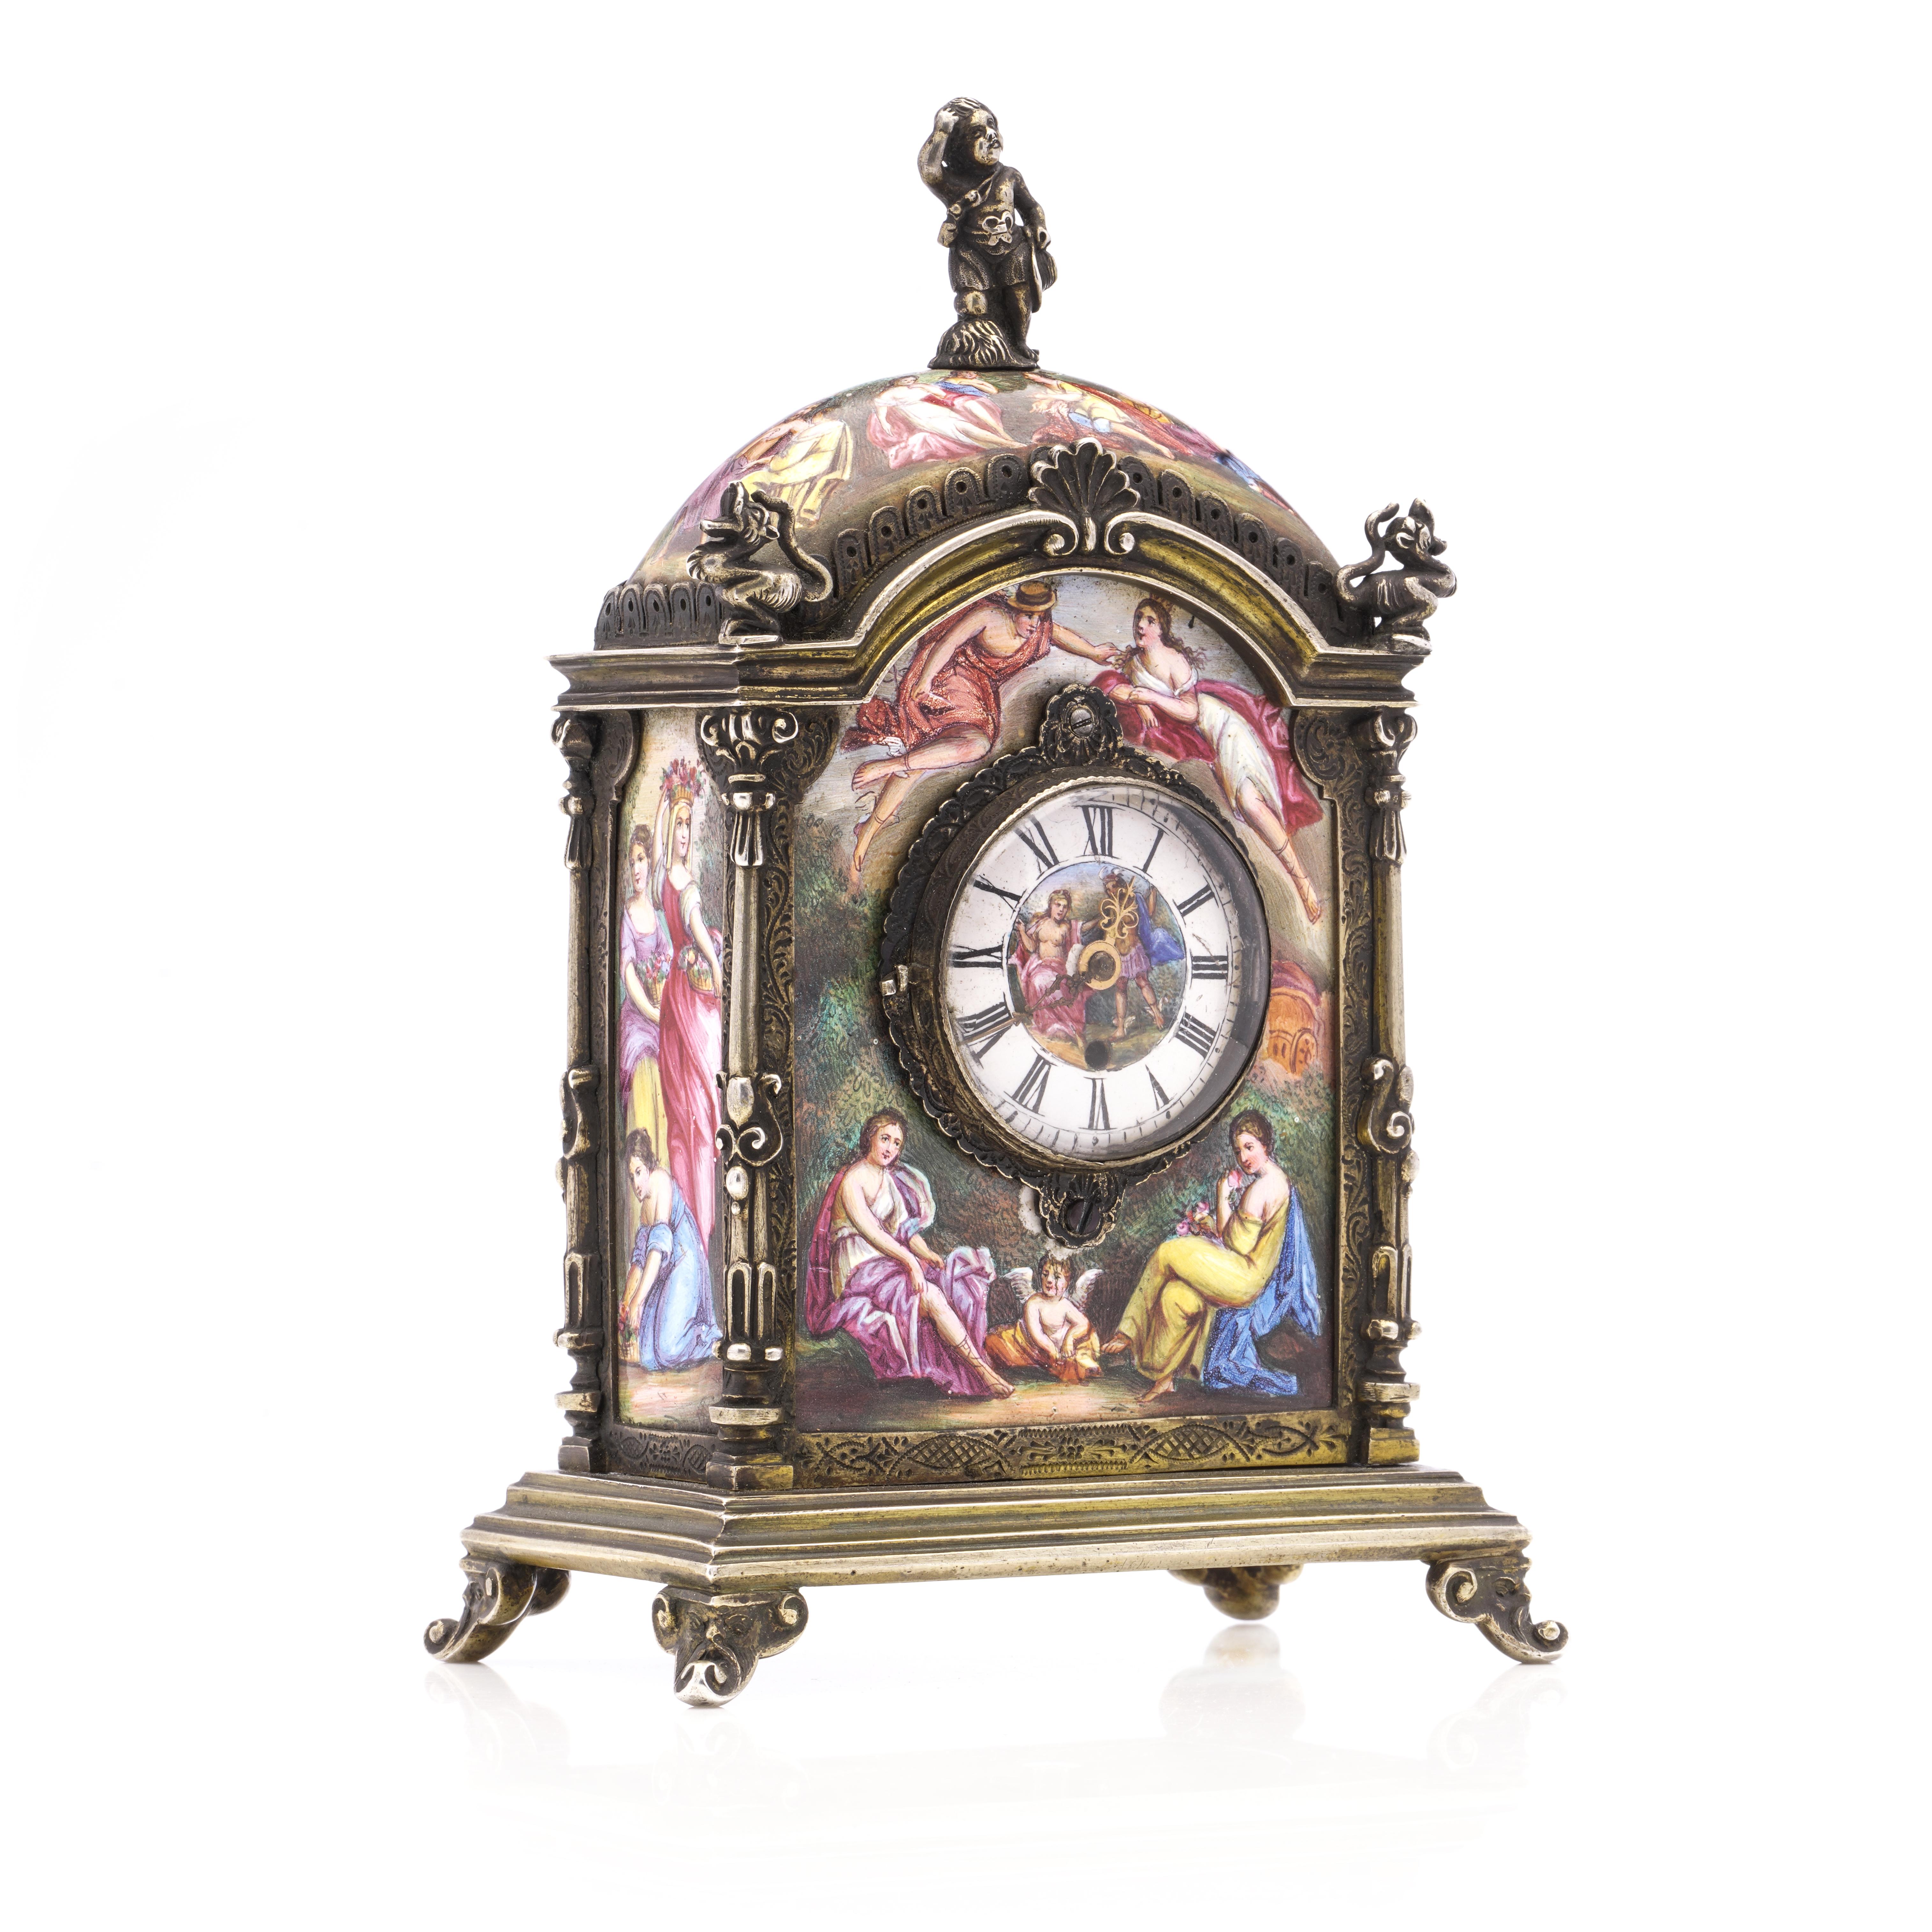 This is an antique Austrian silver gilt and enamel clock with an arched rectangular form on a stepped base, featuring scroll bracket feet. The corners of the clock are formed as pilasters surmounted by mythical creatures. There is a figure of a boy